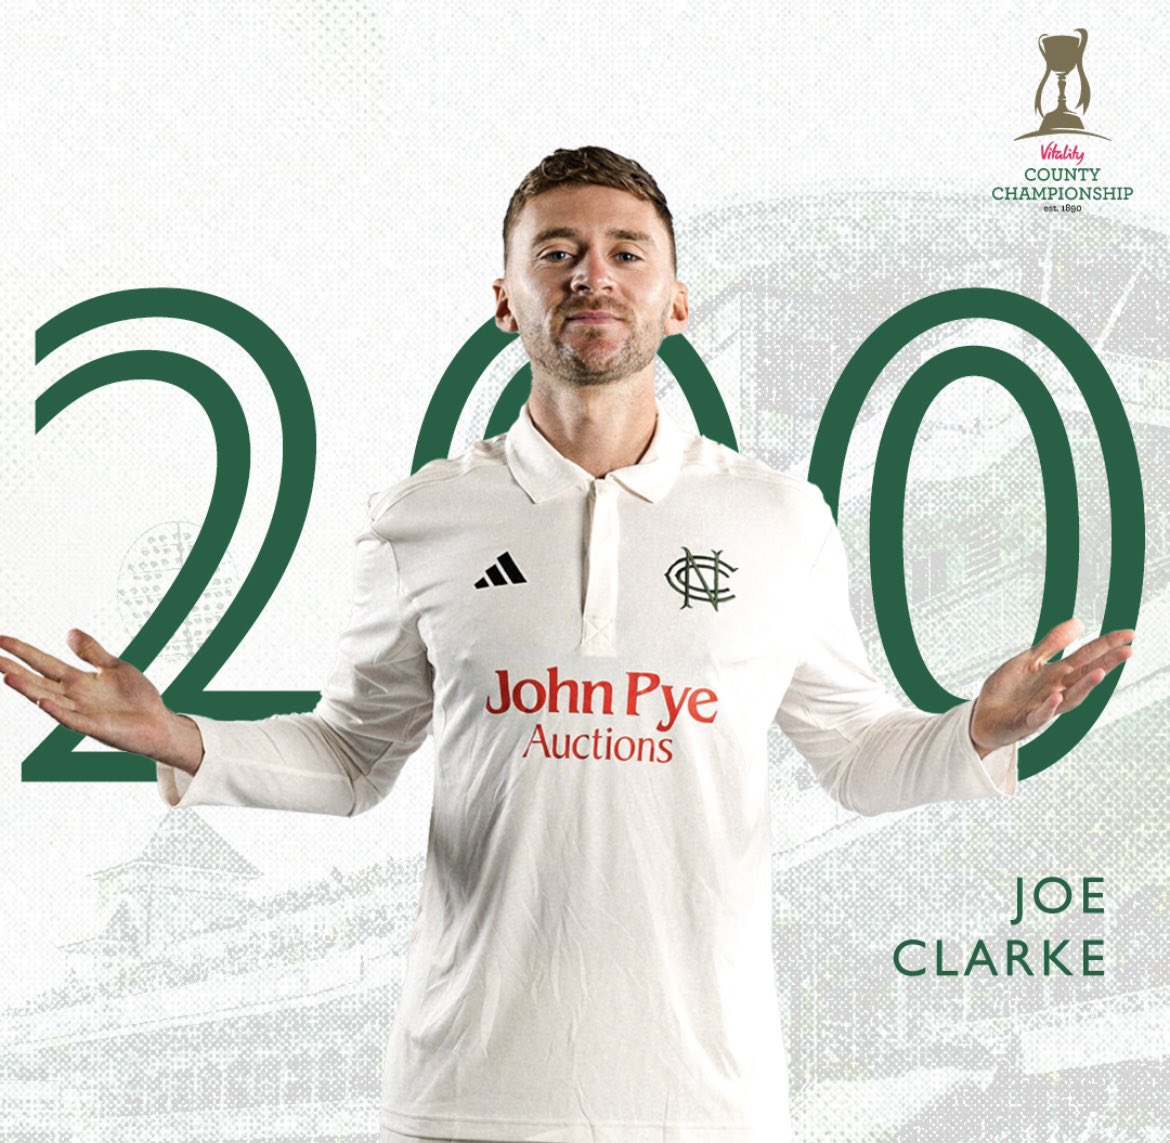 A magnificent double century from one class act 💯⭐️💯 @joeclarke10 continues his supreme run of form 🔥💪👏 @TrentBridge @CountyChamp